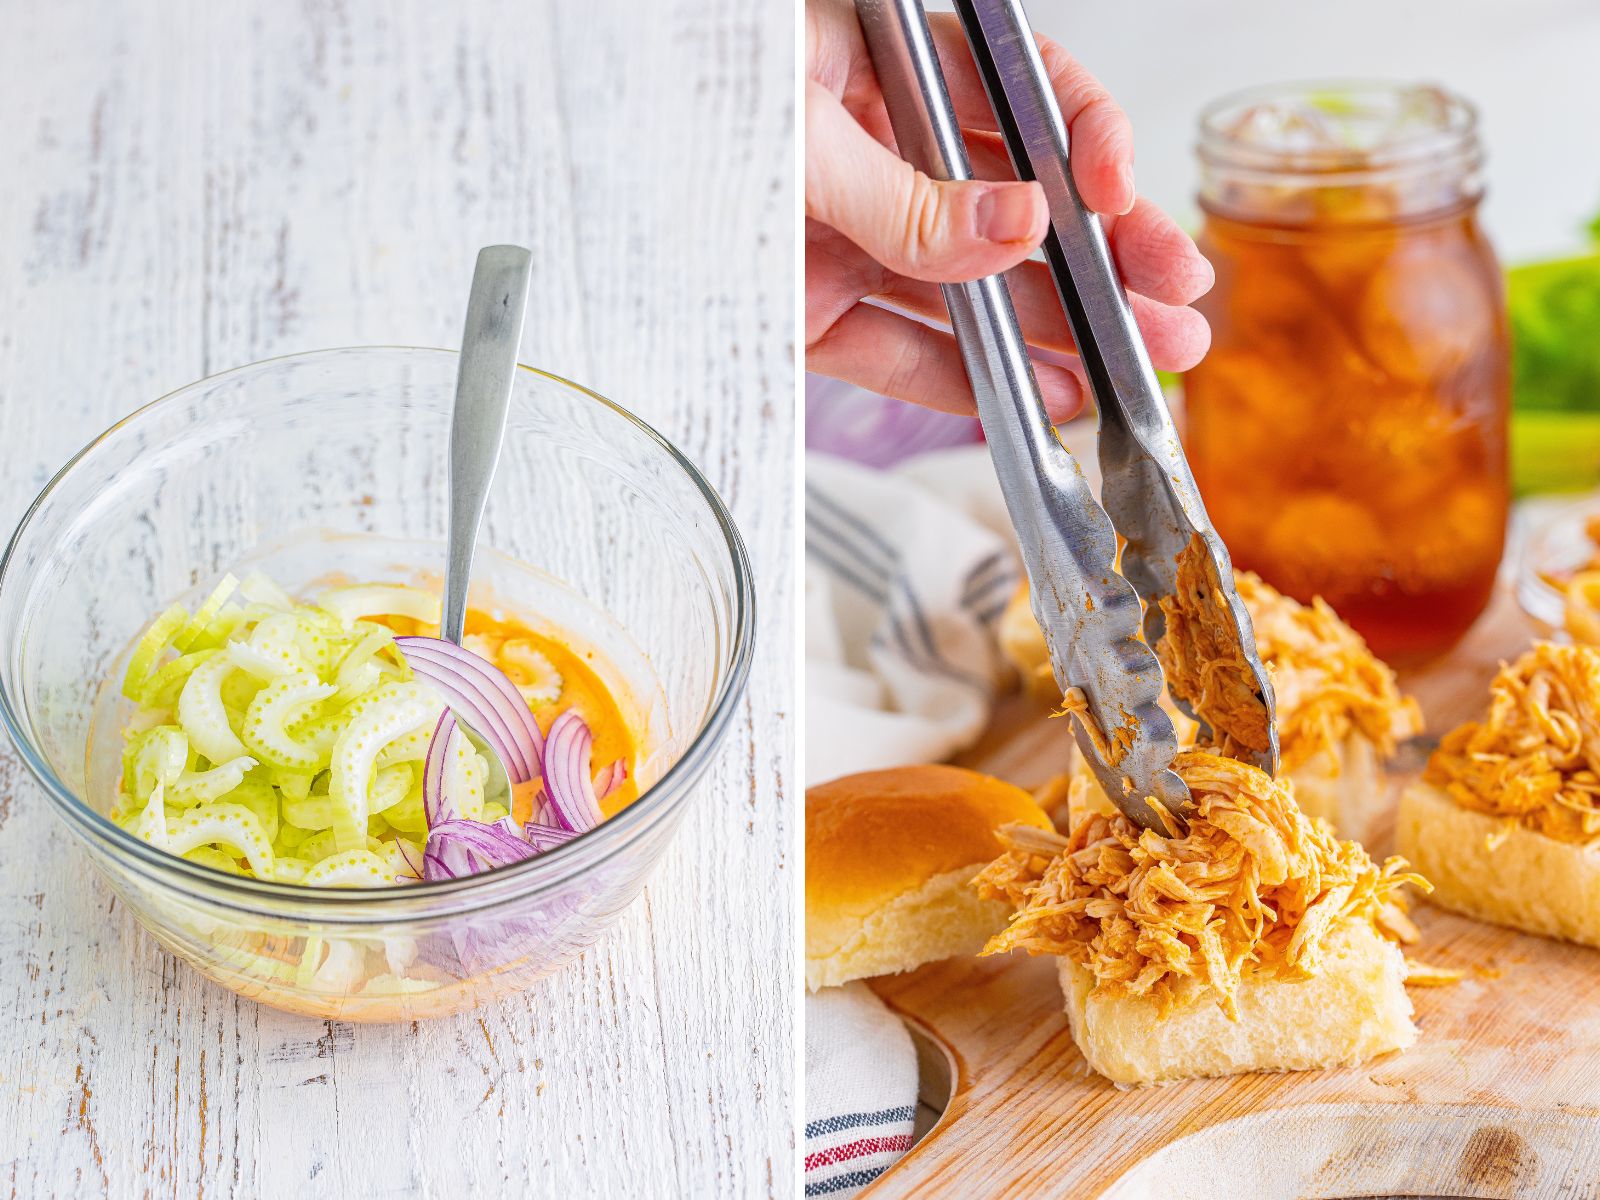 Celery slaw in a bowl and a hand using tongs to put shredded chicken on slider rolls. 